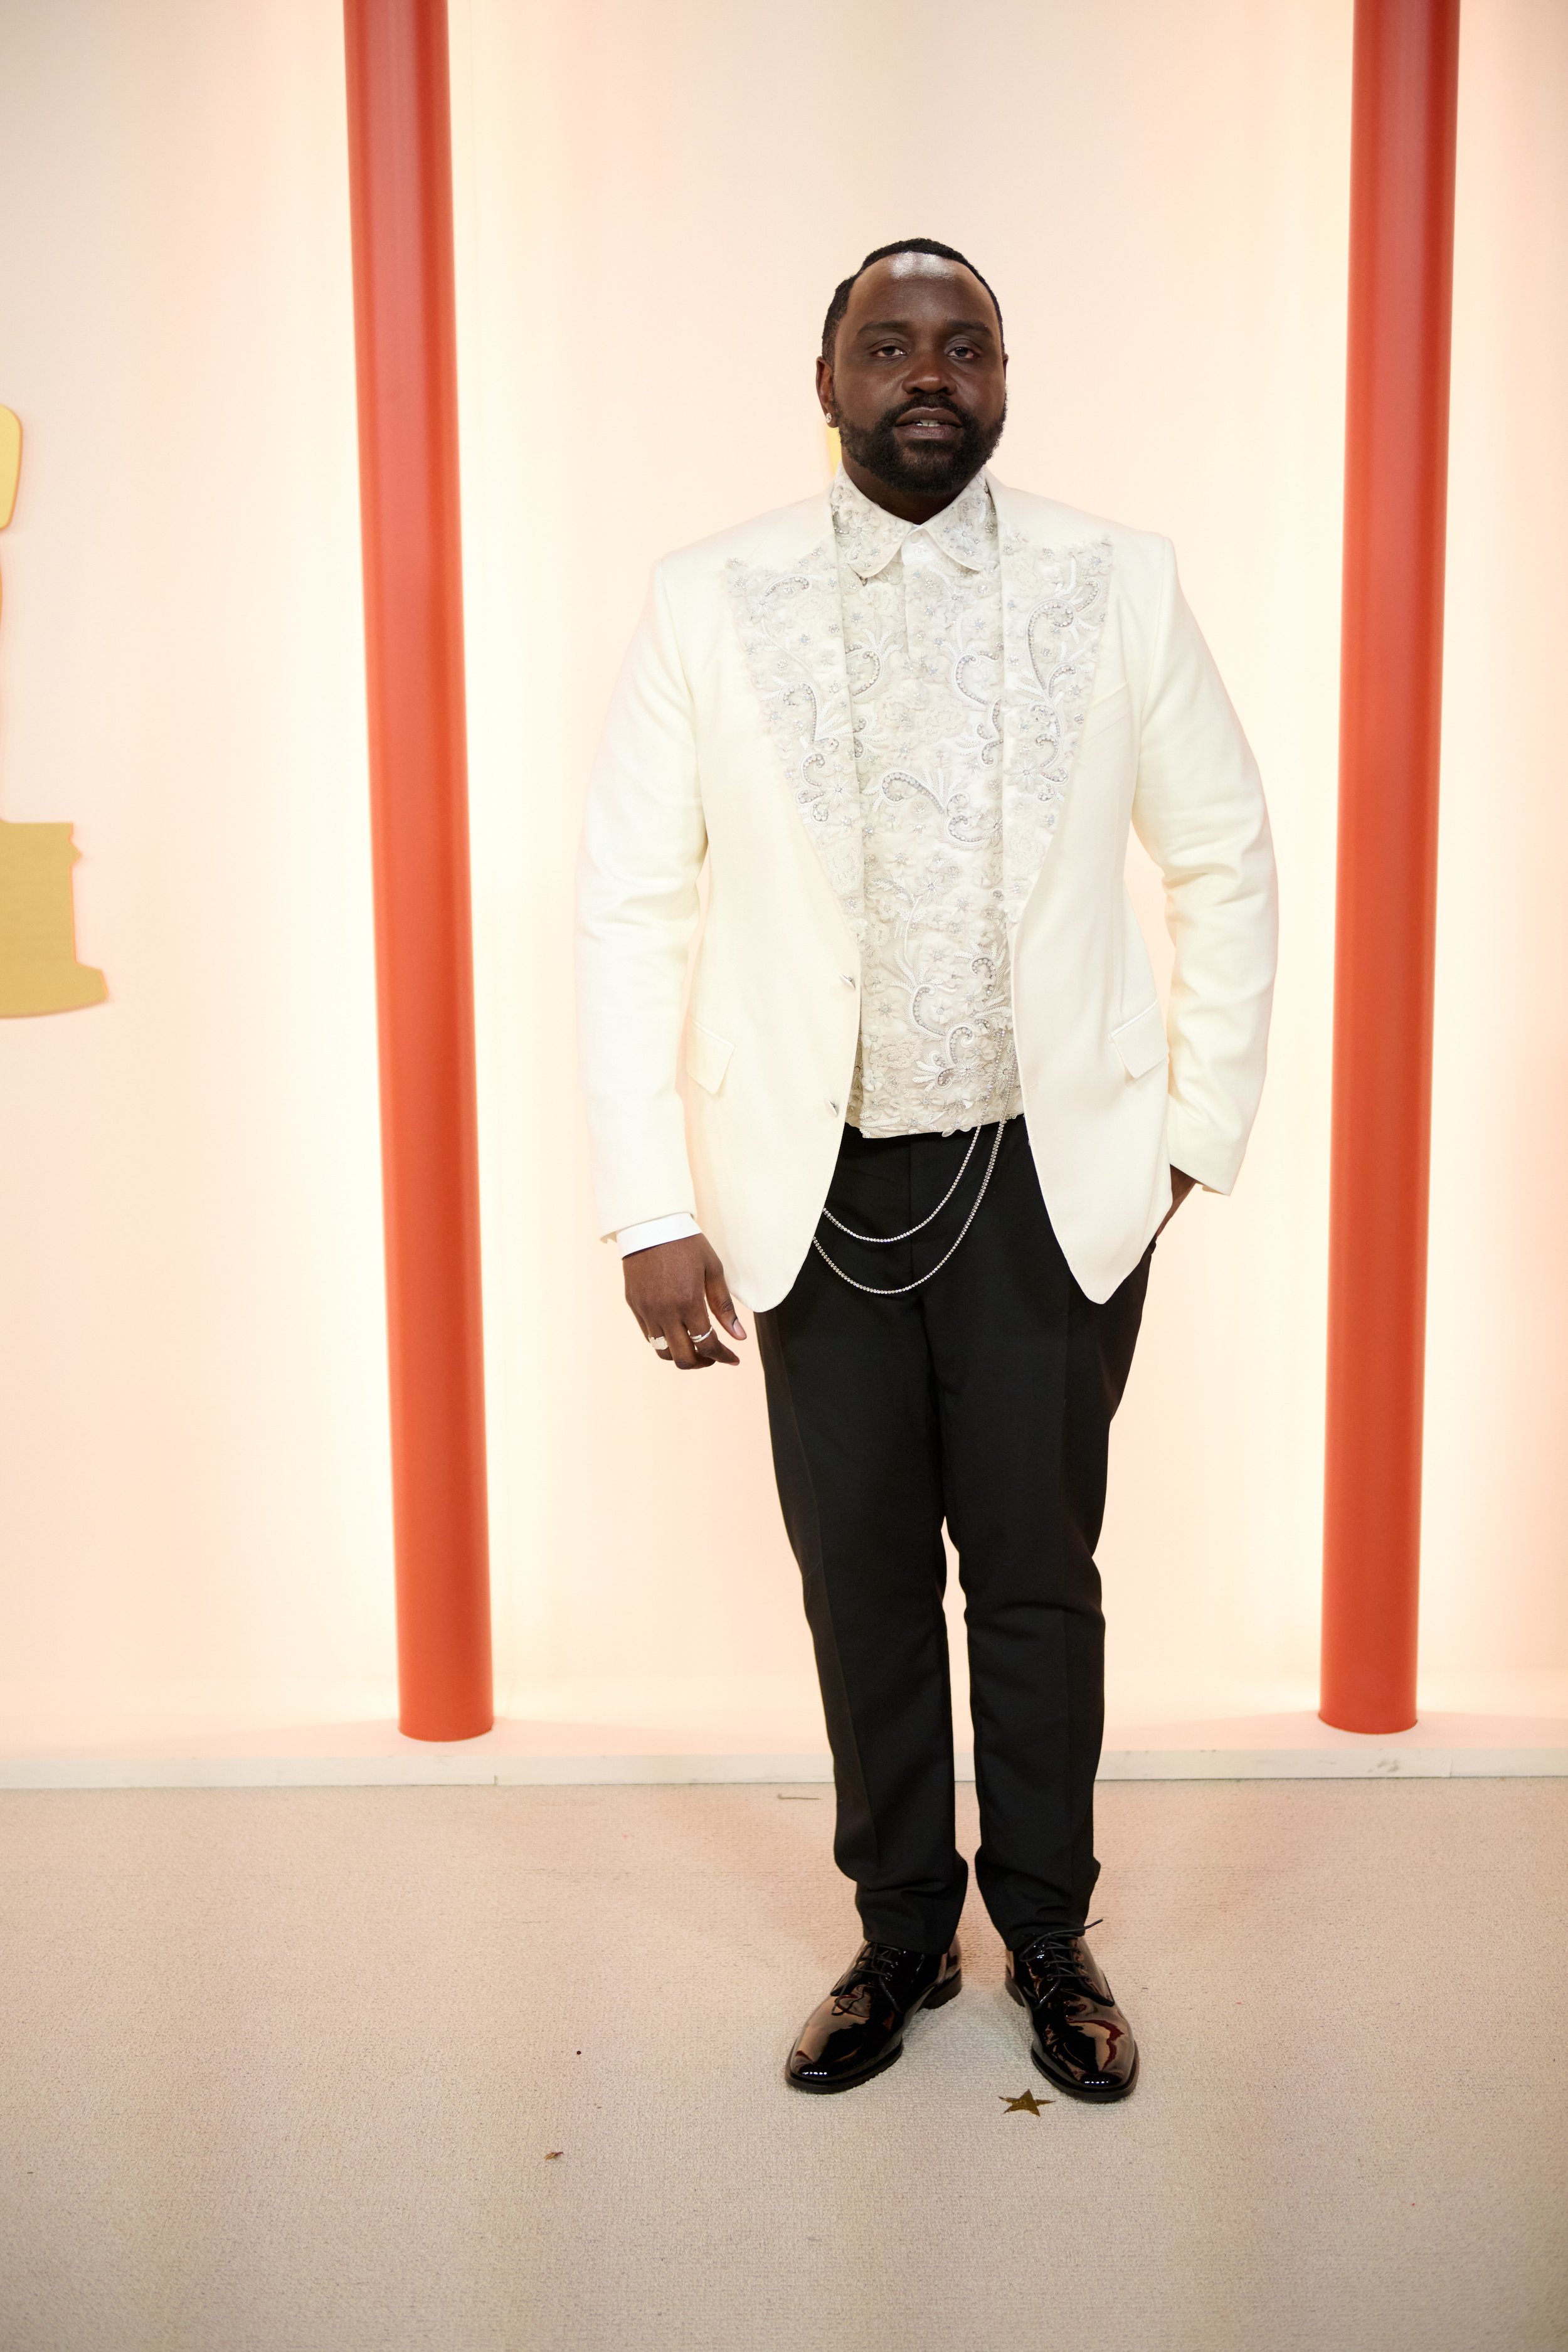 Oscar® nominee Brian Tyree Henry arrives on the red carpet of The 95th Oscars